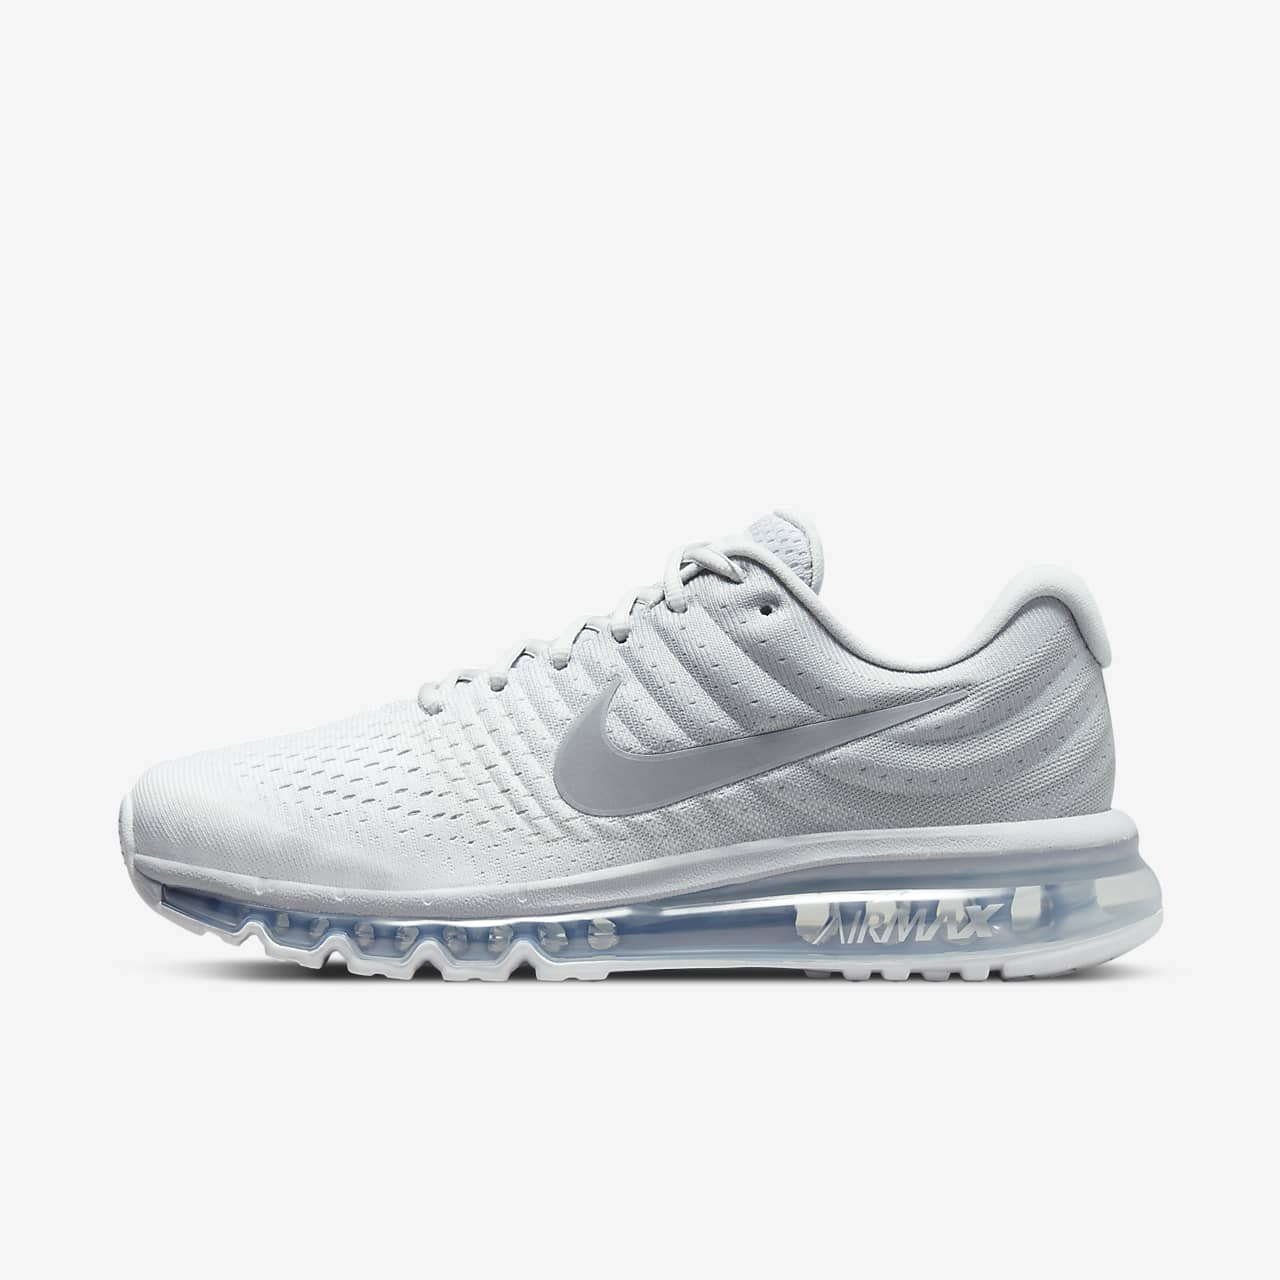 air max 2017 white and black